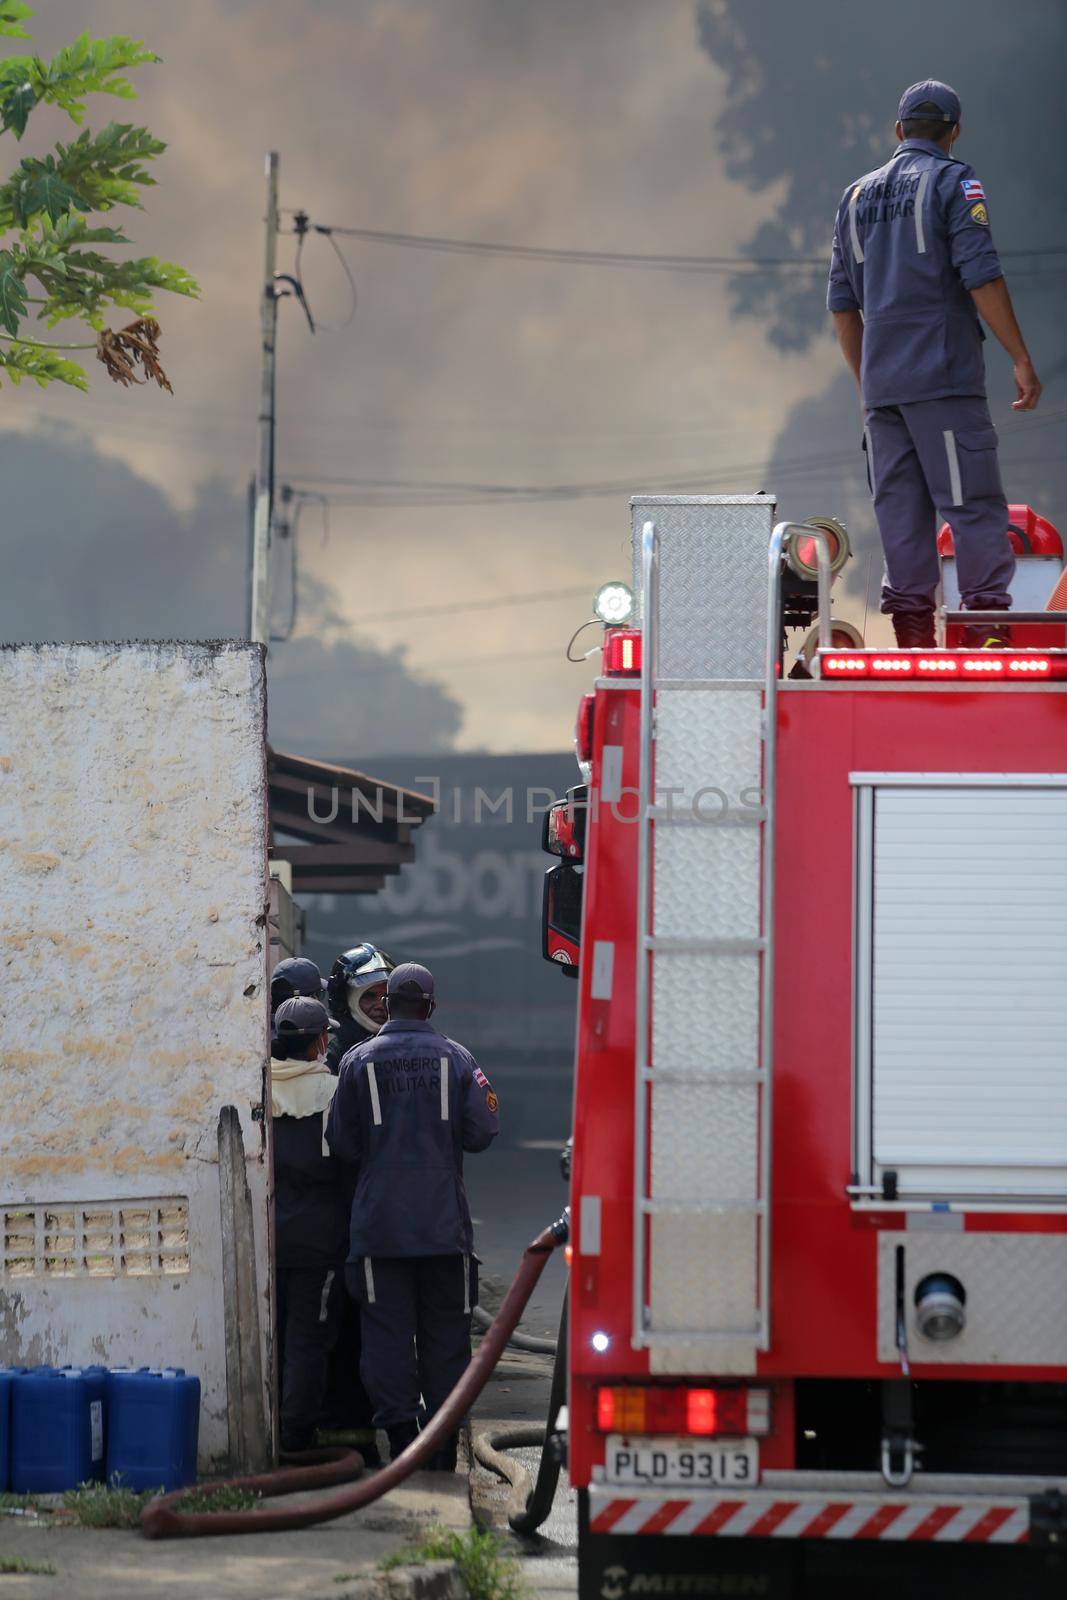 salvador, bahia, brazil - march 19, 2019: Members of the Fire Department fire fighting the mattress factory in the Valeria neighborhood in the city of Salvador.